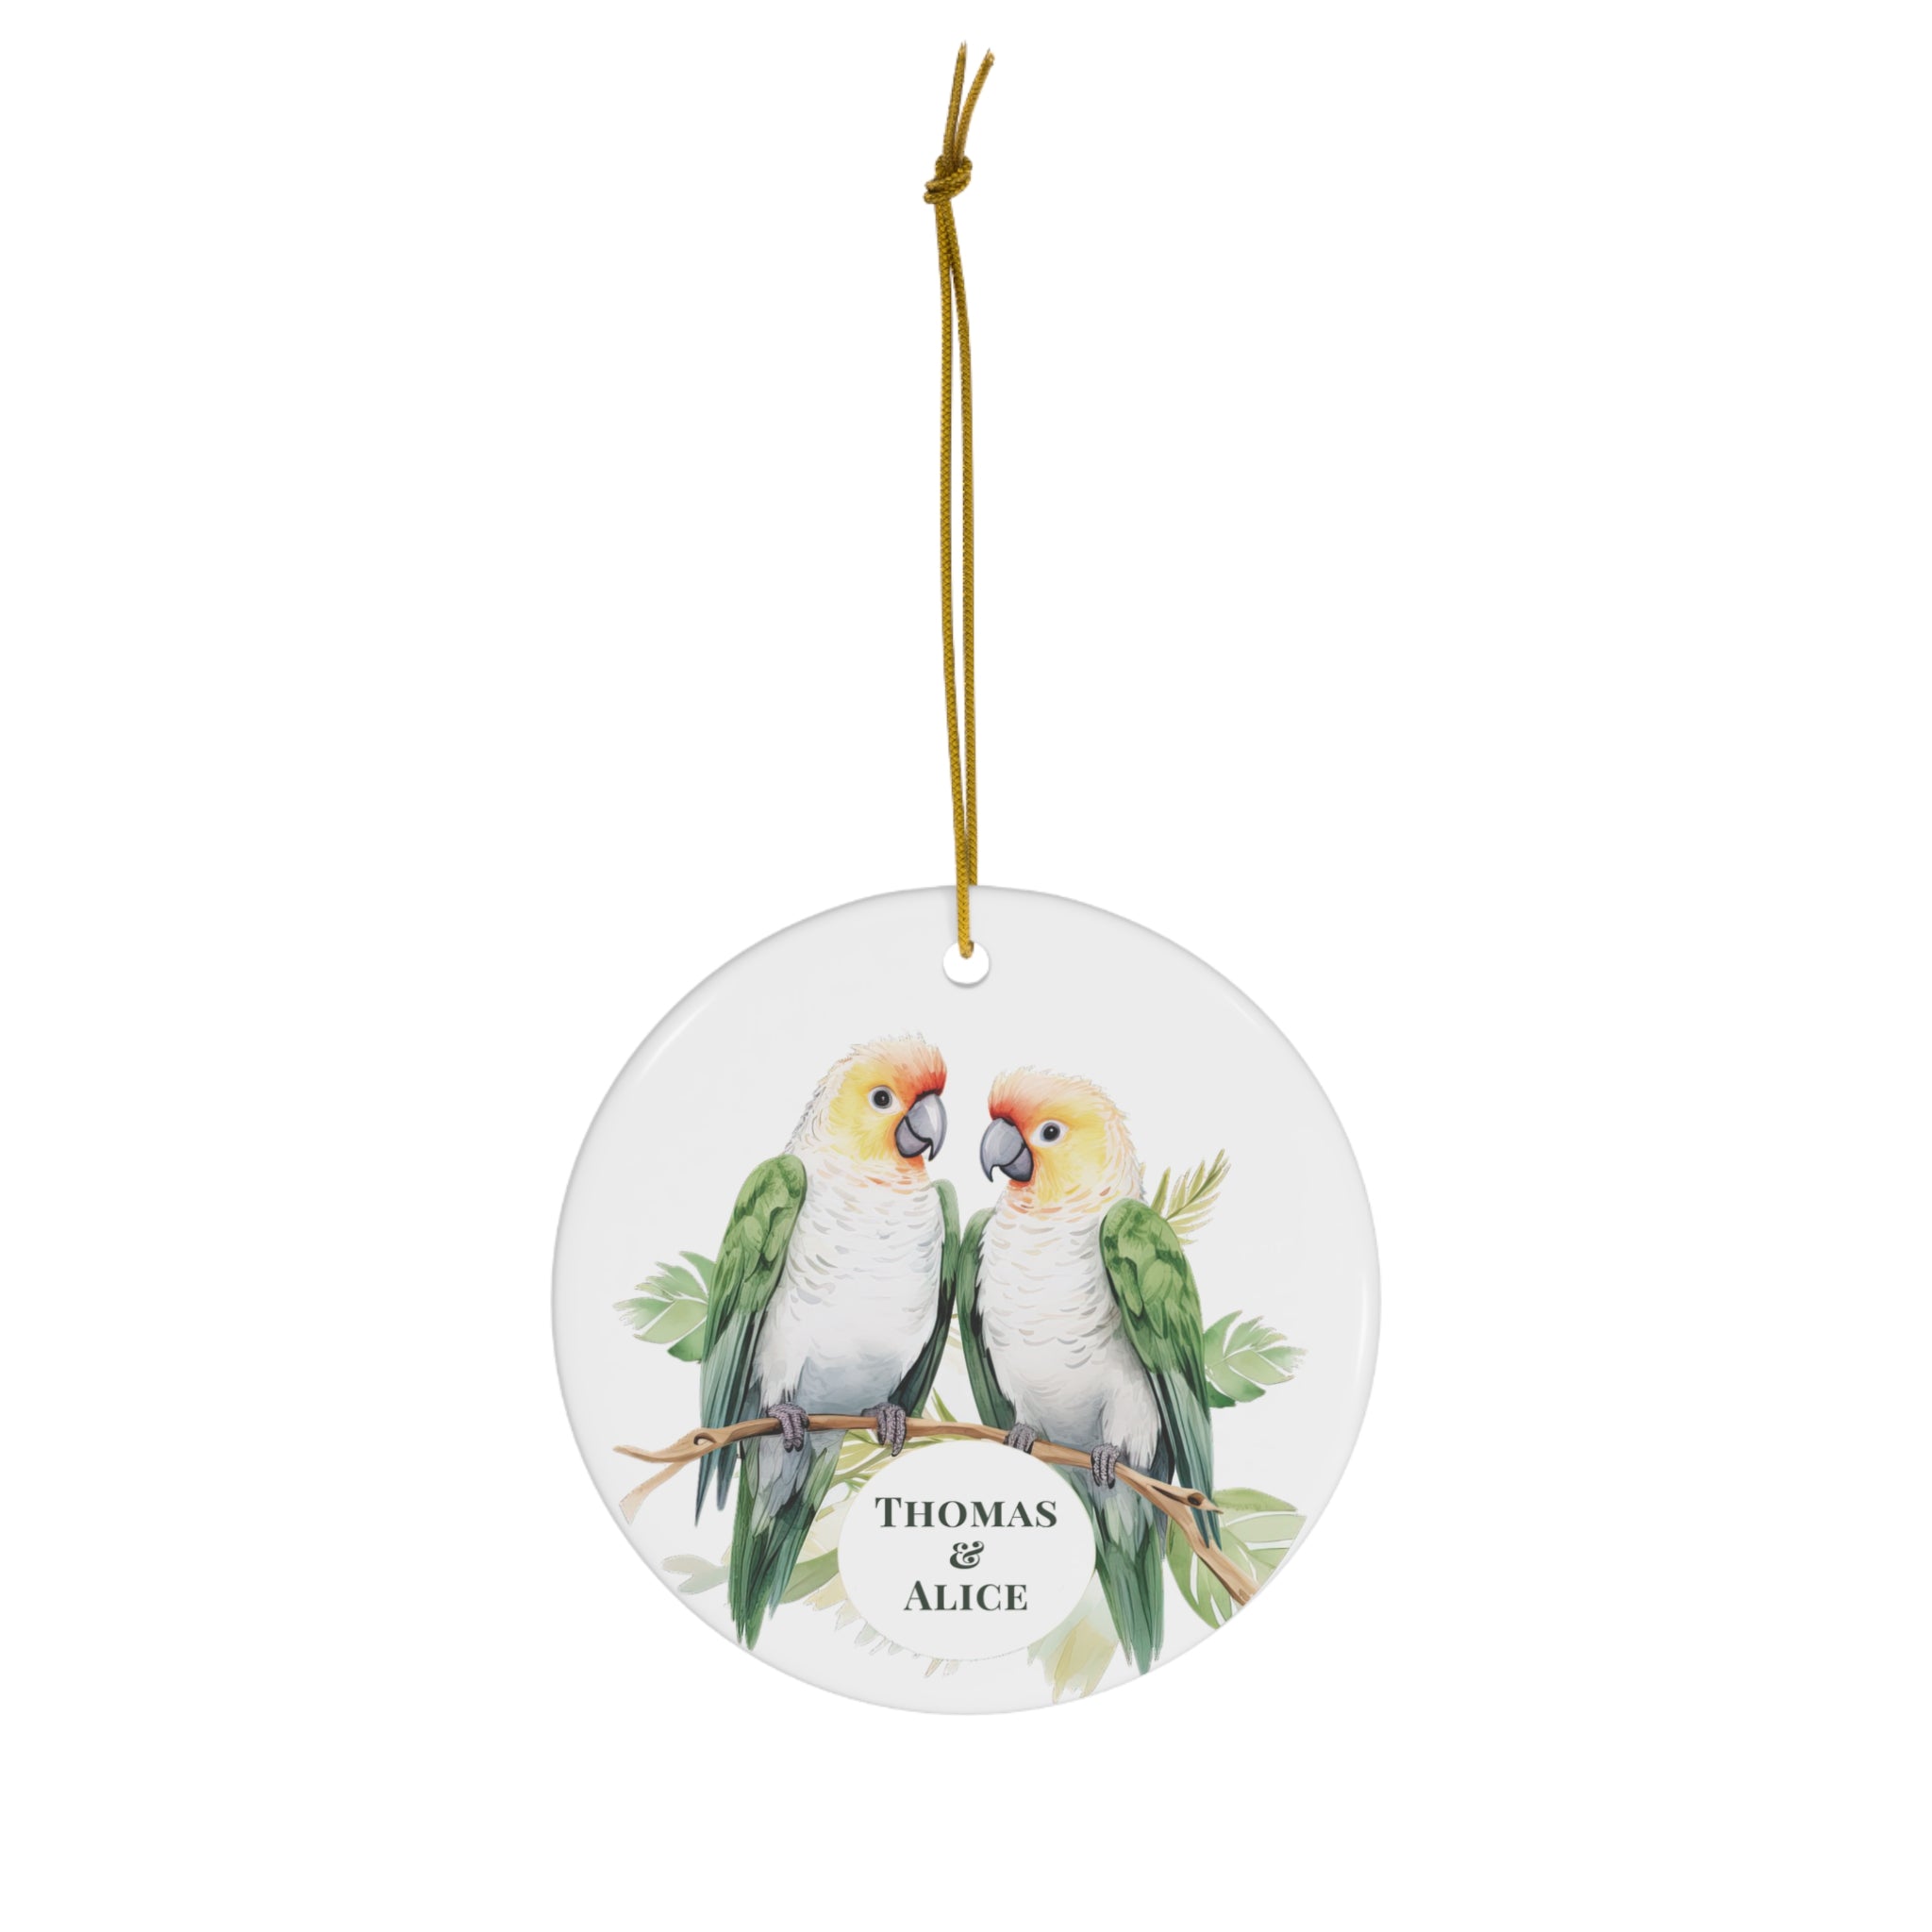 Personalized Green, White & Yellow Parrot Birds Ornament